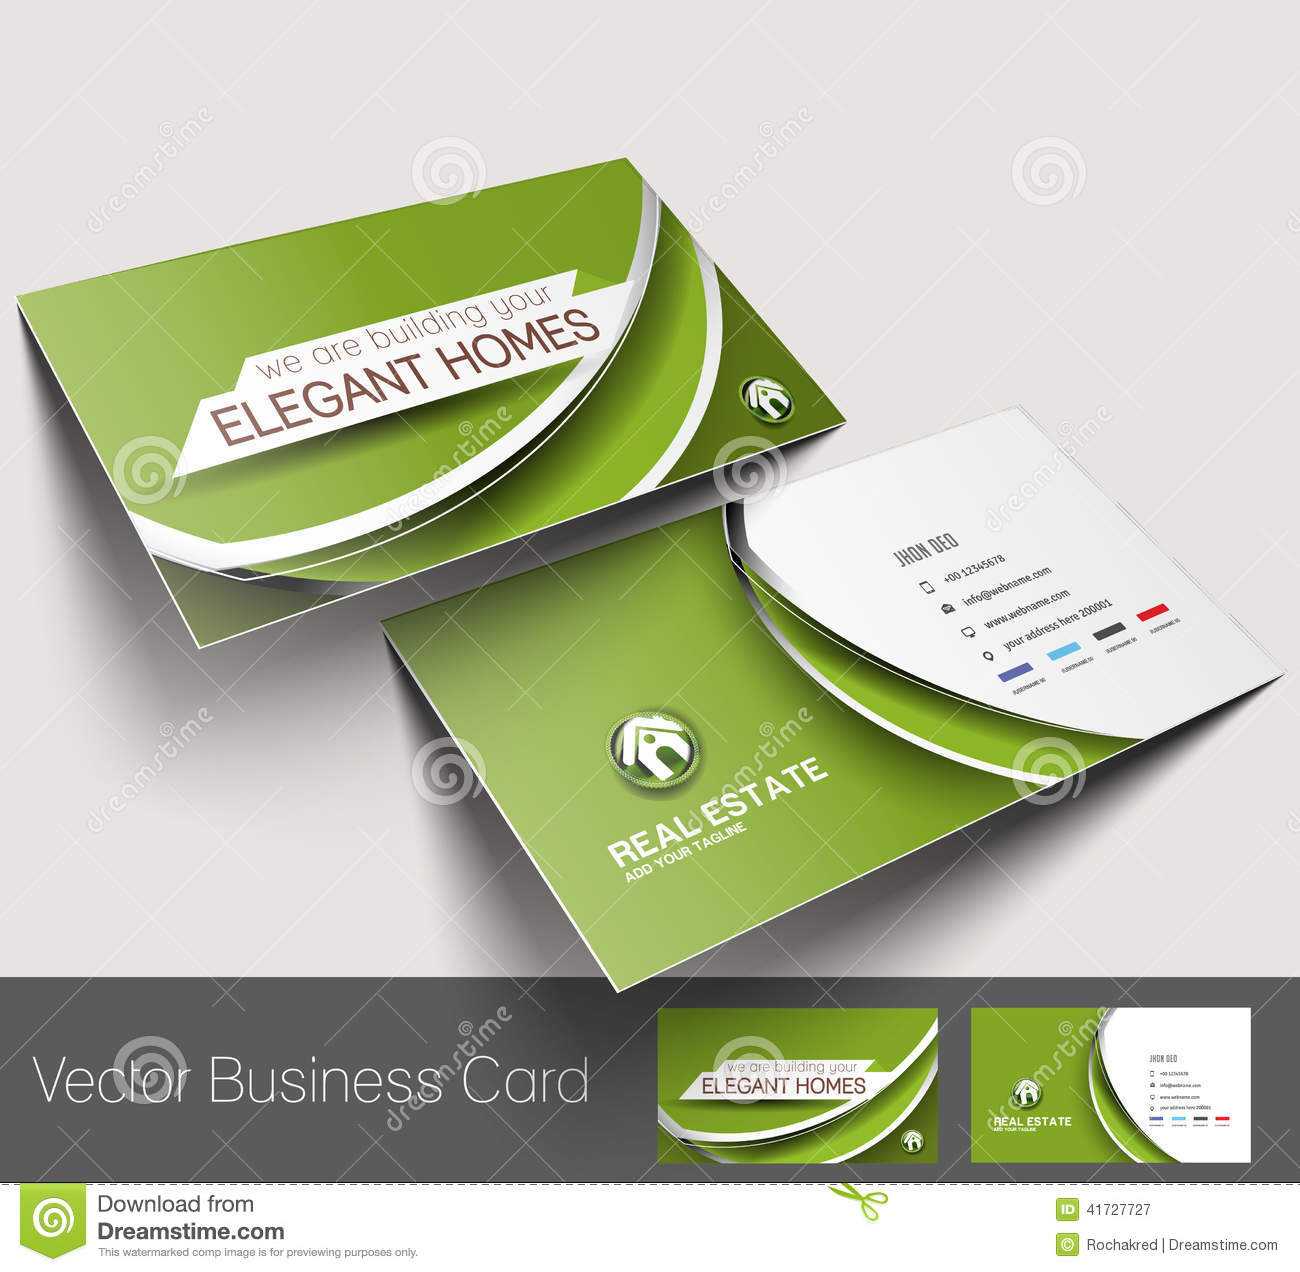 Real Estate Agent Business Card Stock Vector – Illustration With Real Estate Agent Business Card Template